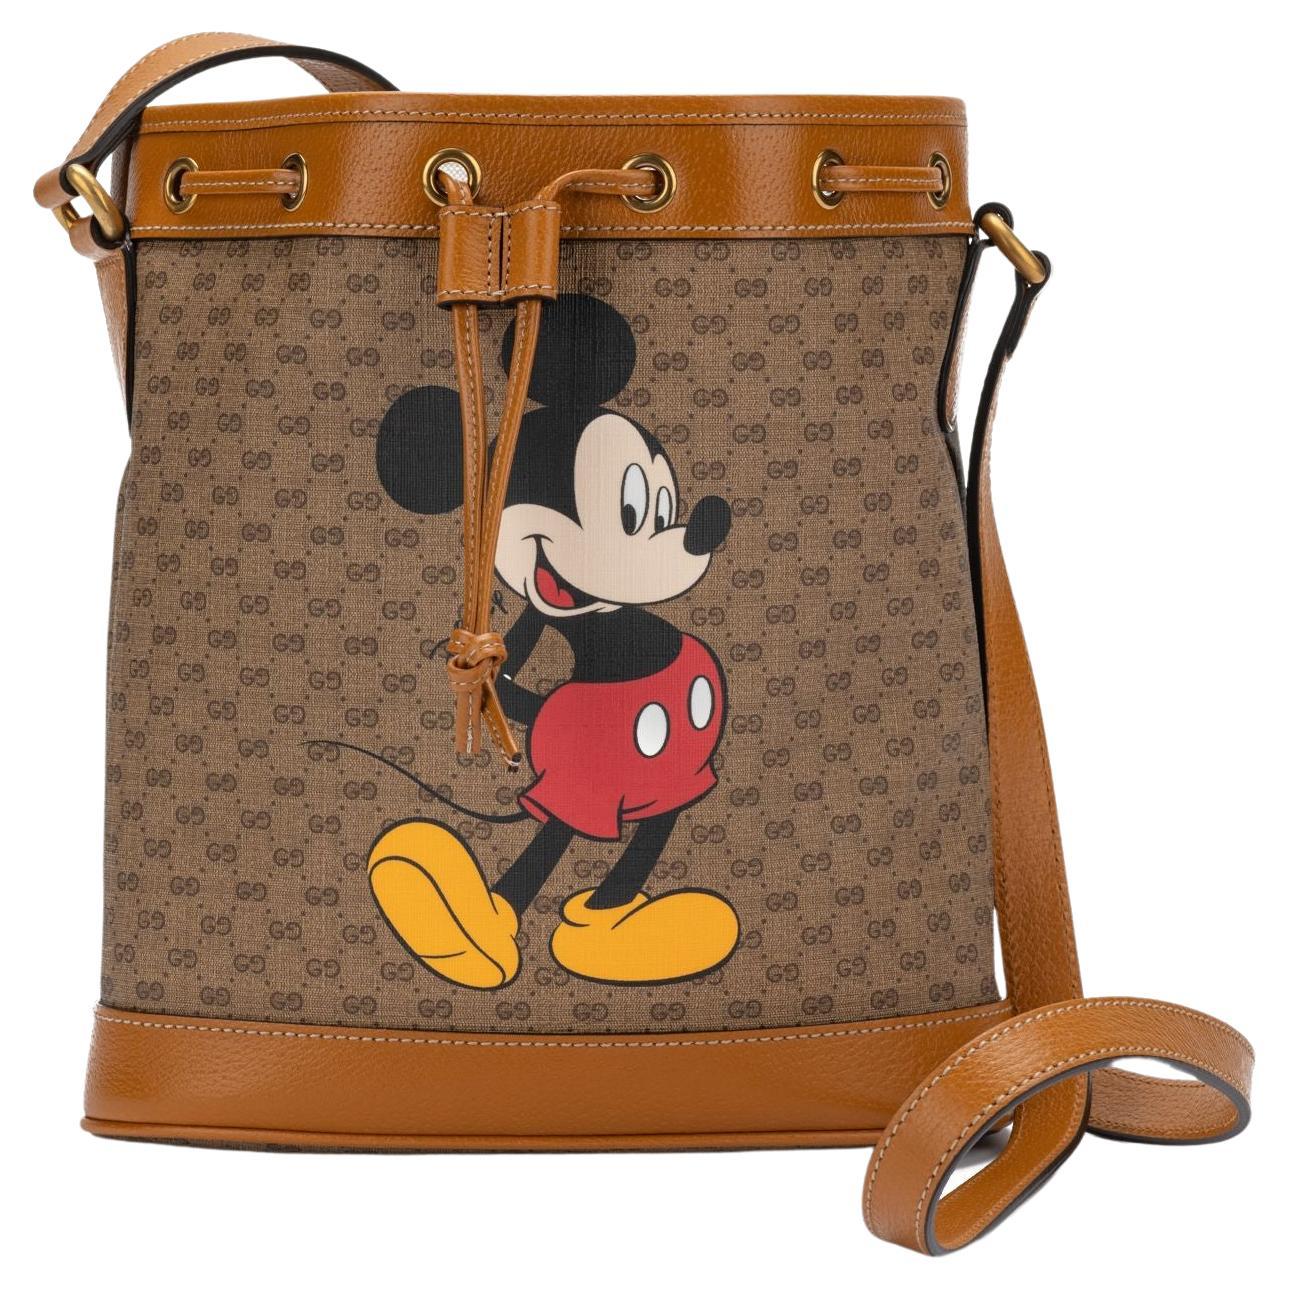 Gucci X Disney Mickey Mouse Print Medium Tote Bag in Natural for Men | Lyst